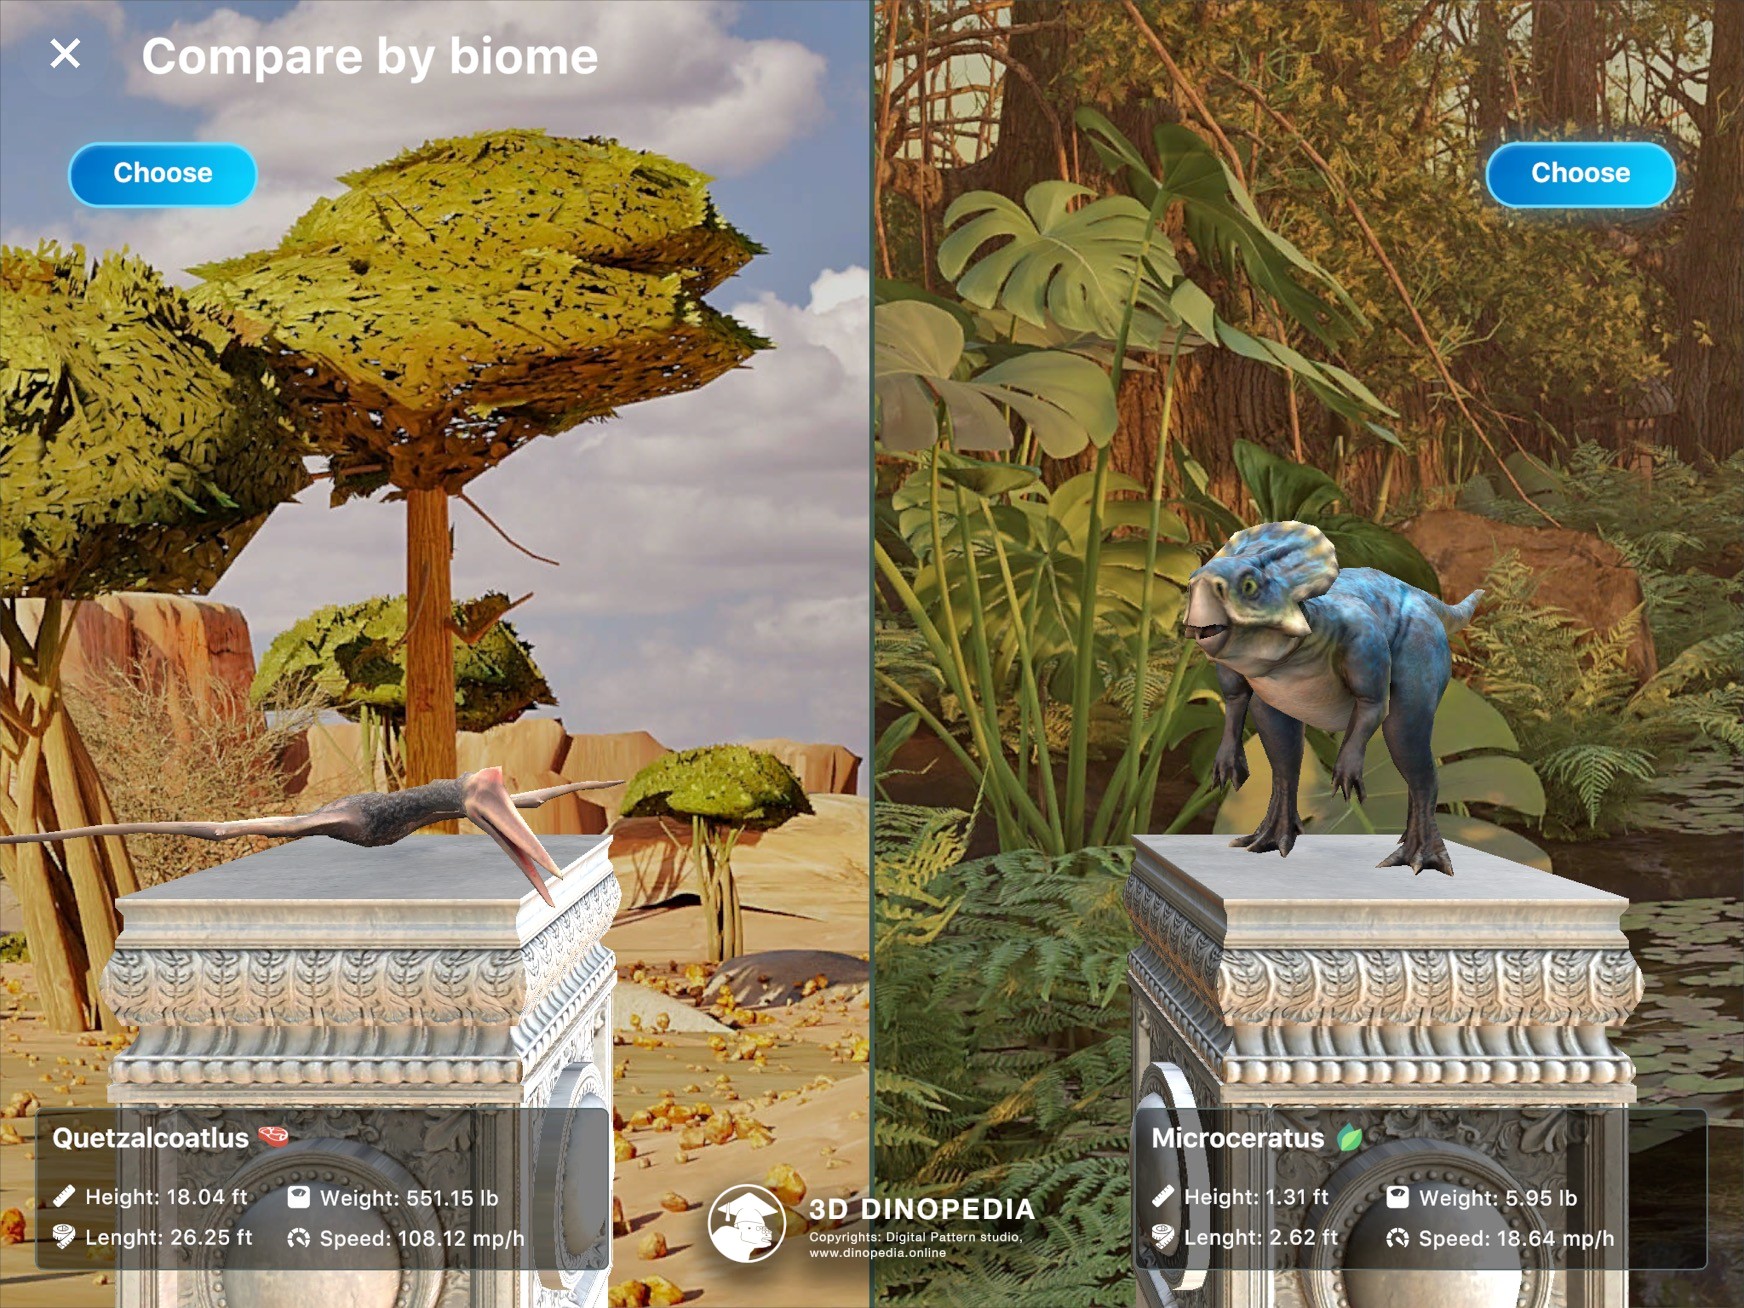 3D Dinopedia Discover what's new in the 3D Dinopedia app, version 4.13